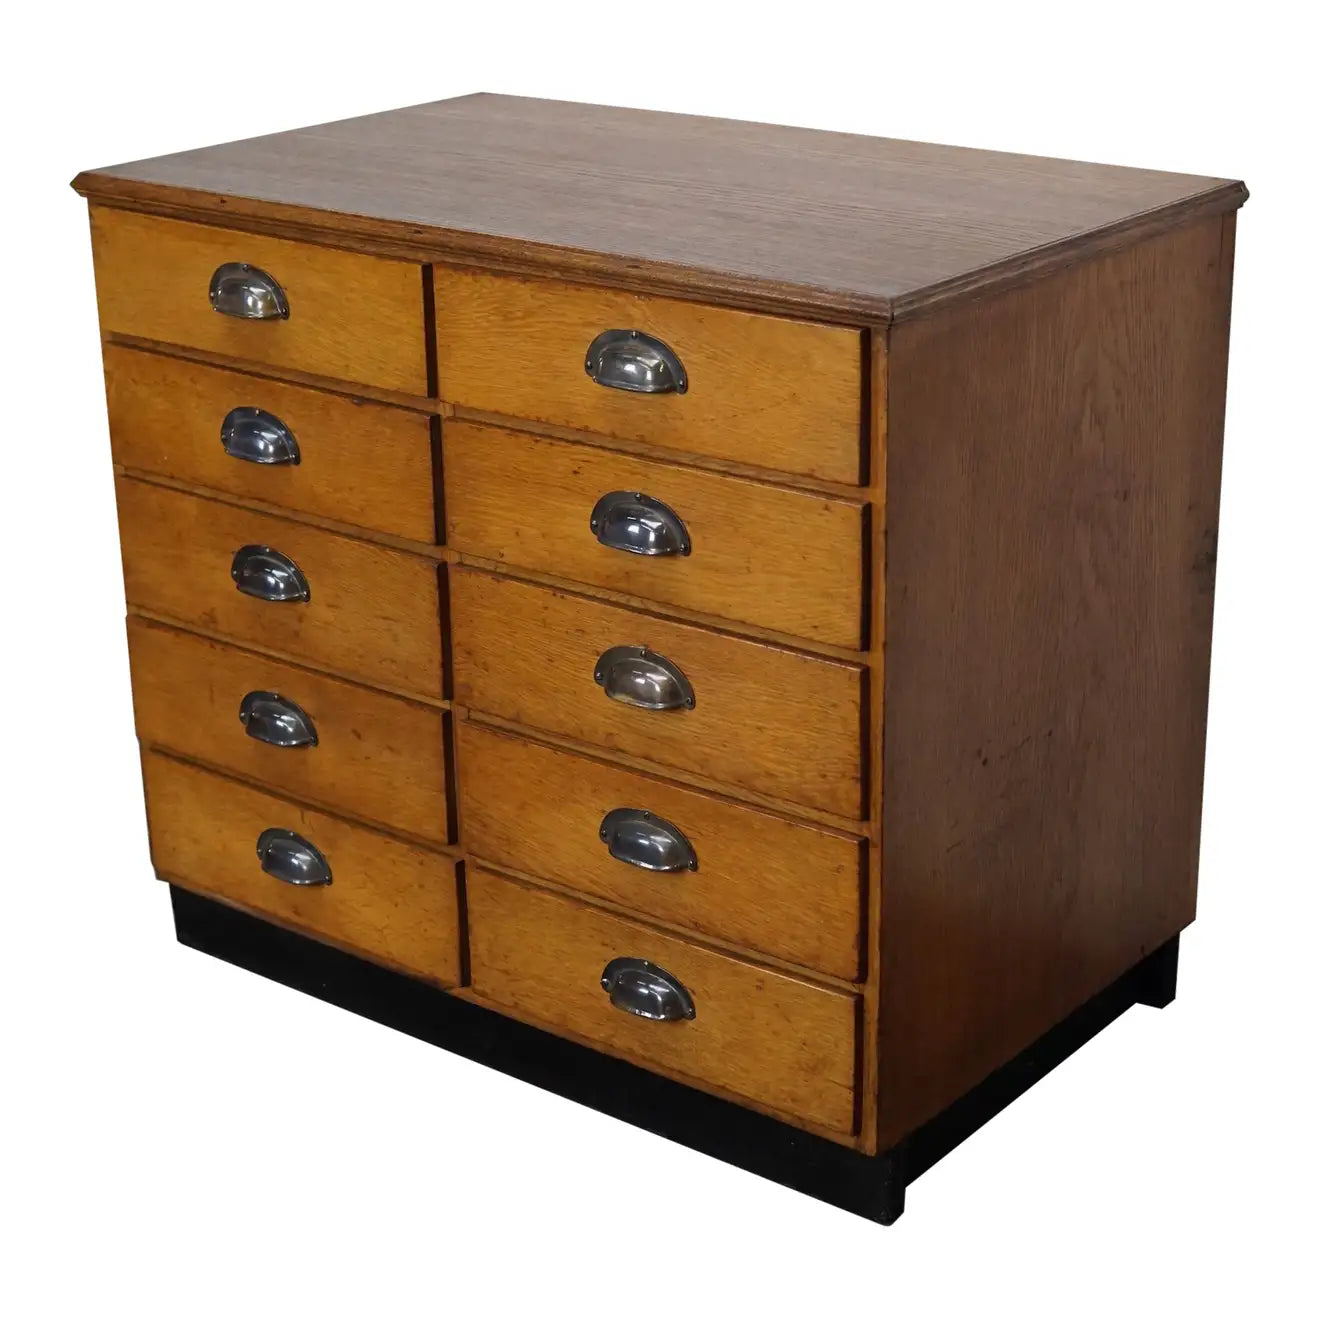 German Oak / Pine Apothecary Cabinet or Bank of Drawers, Mid 20th Century